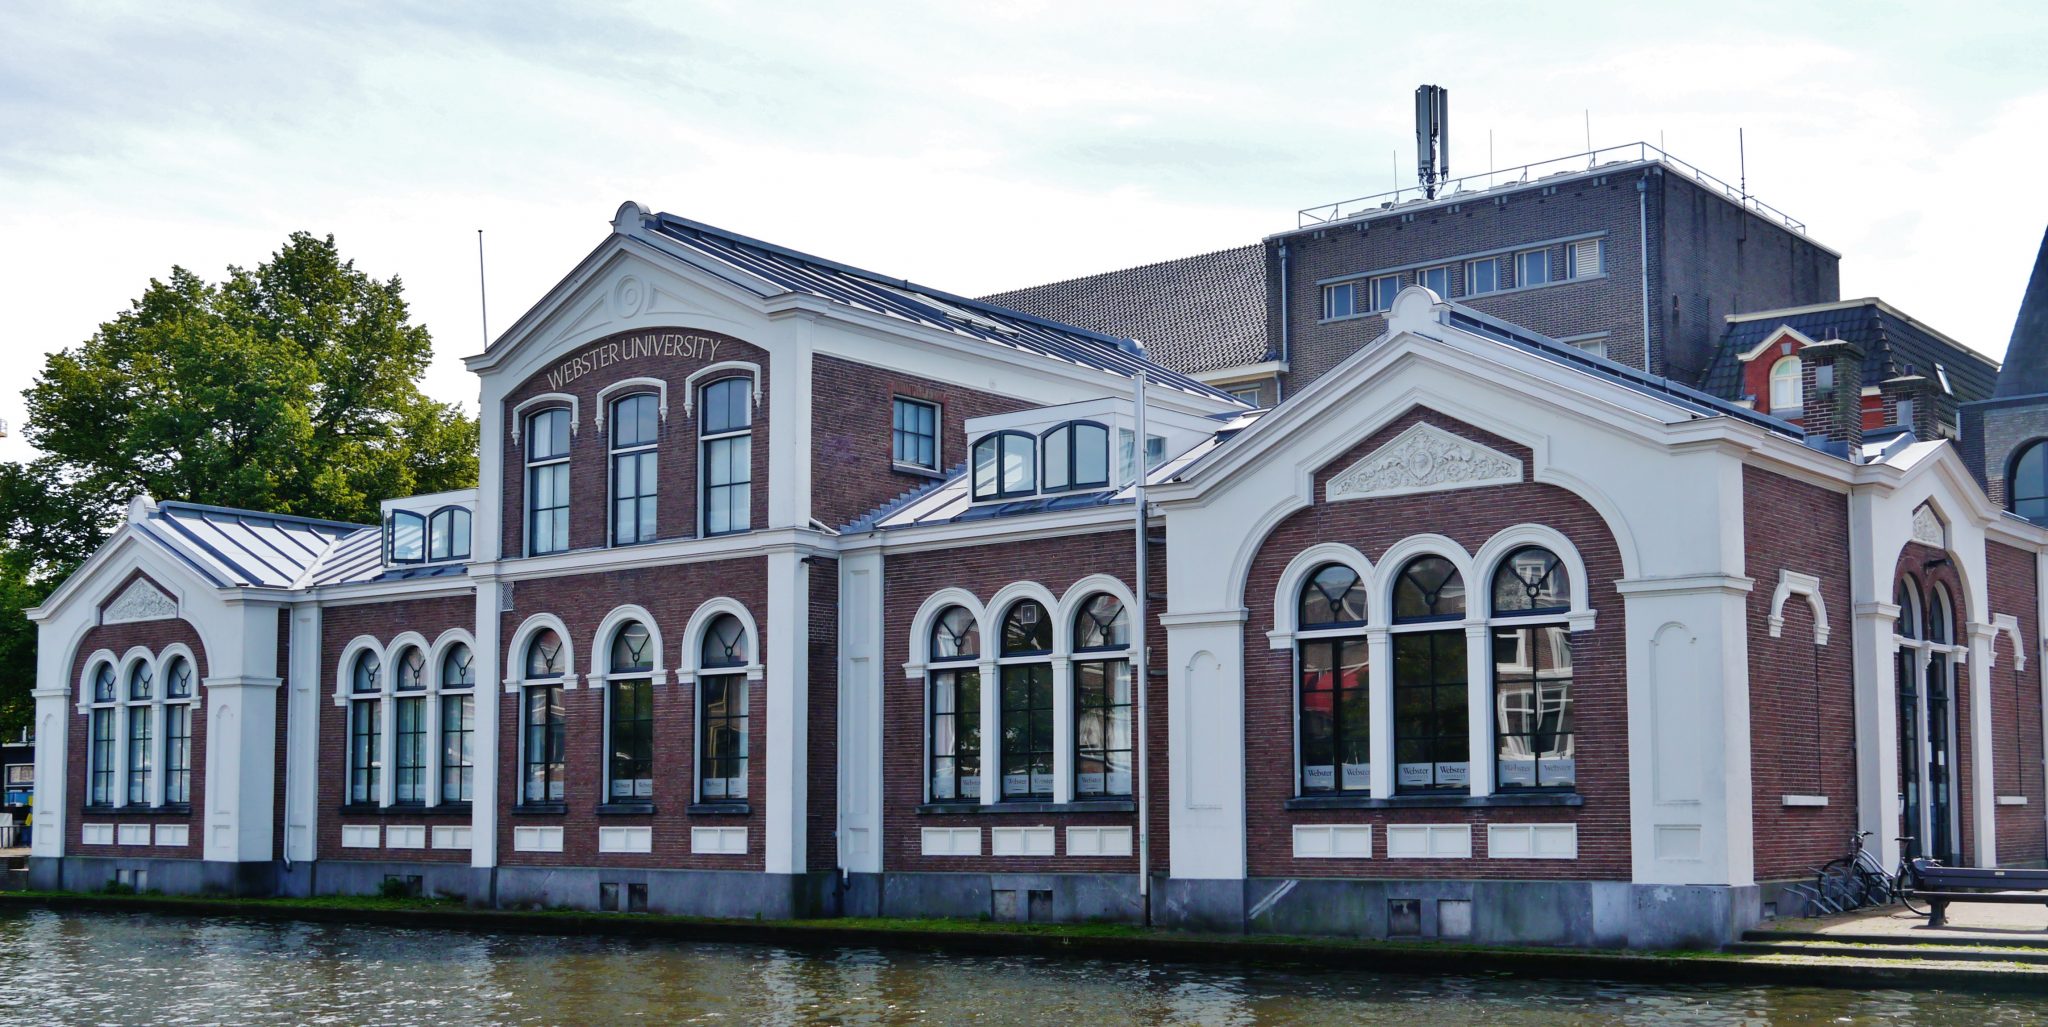 Webster University Leiden-- one of their first international campuses